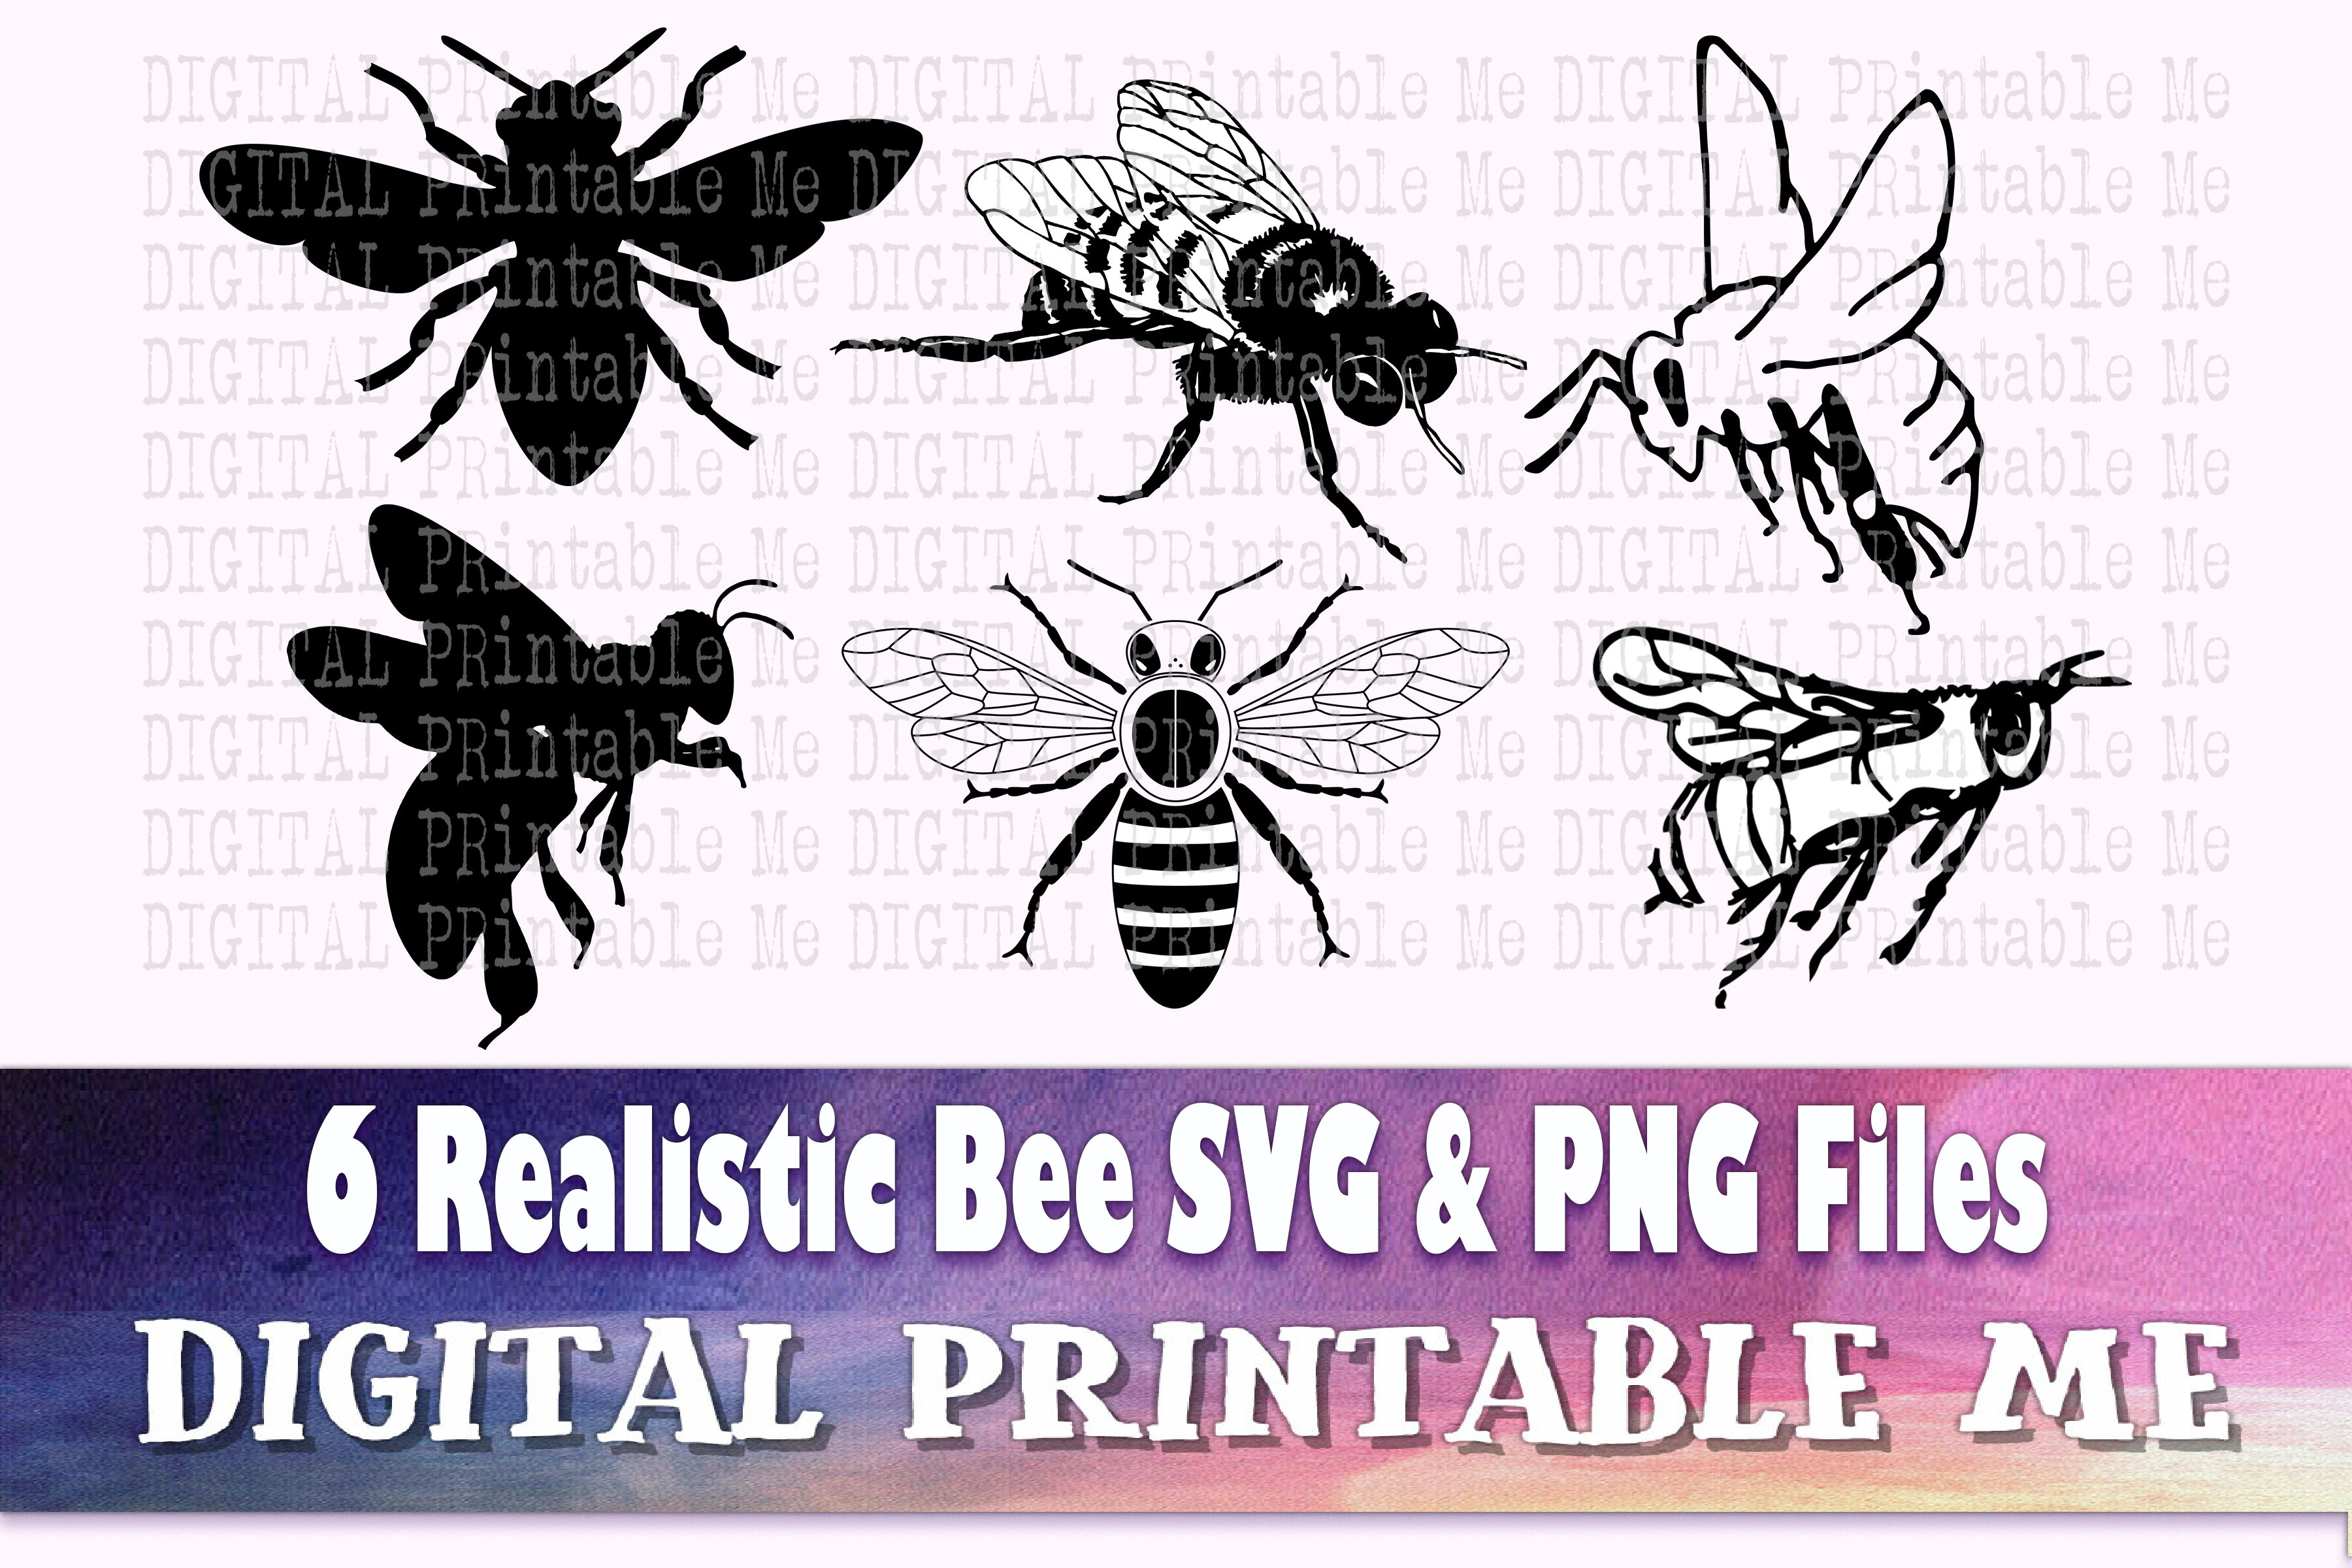 Download Bees Svg Bundle Realistic Bee Silhouette Outline Png Clip Art 6 Di By Digitalprintableme Thehungryjpeg Com